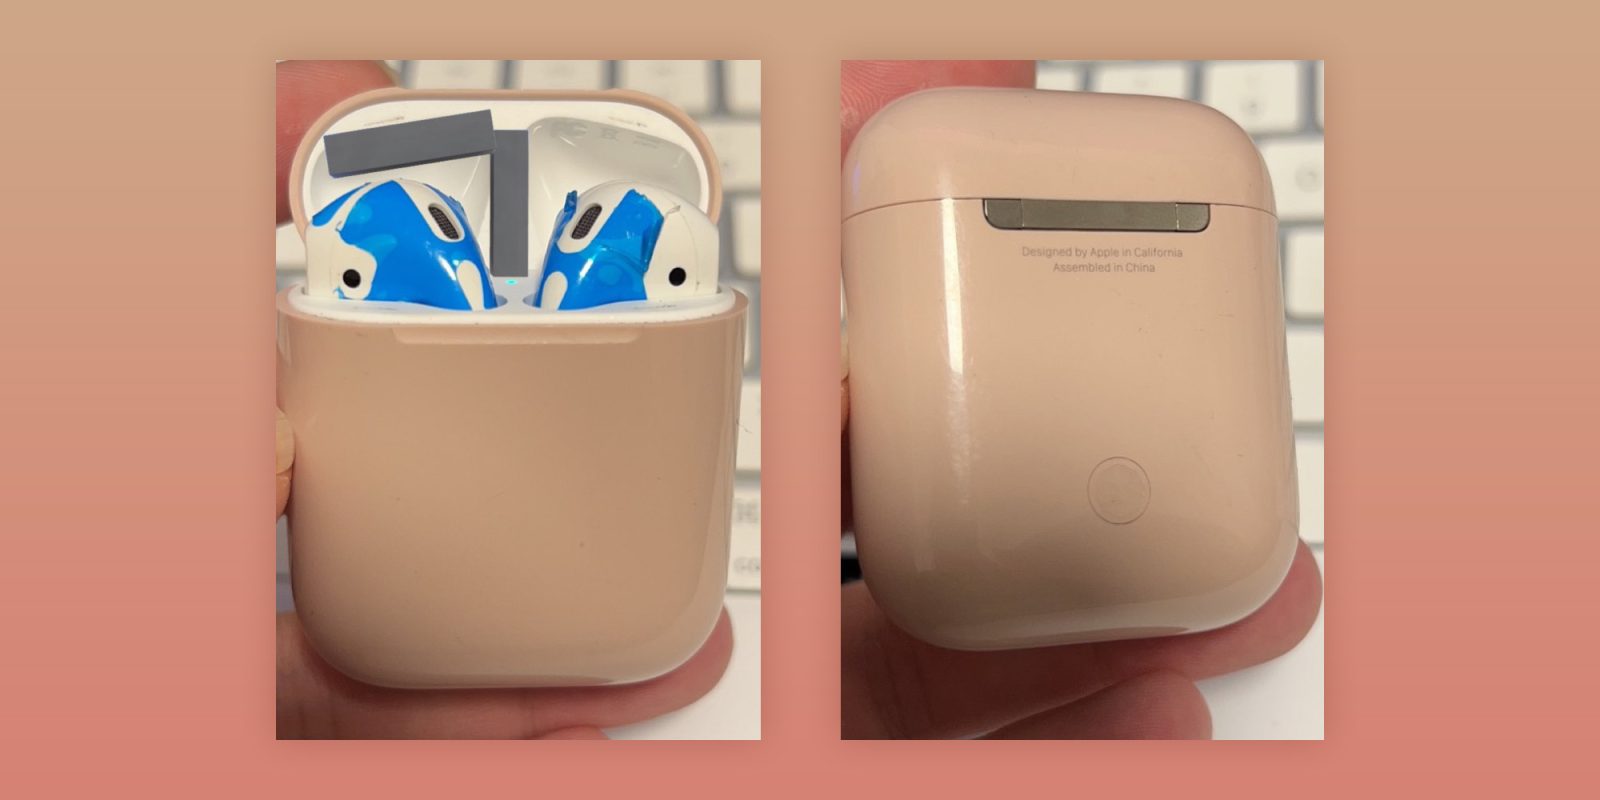 Colorful AirPods prototype